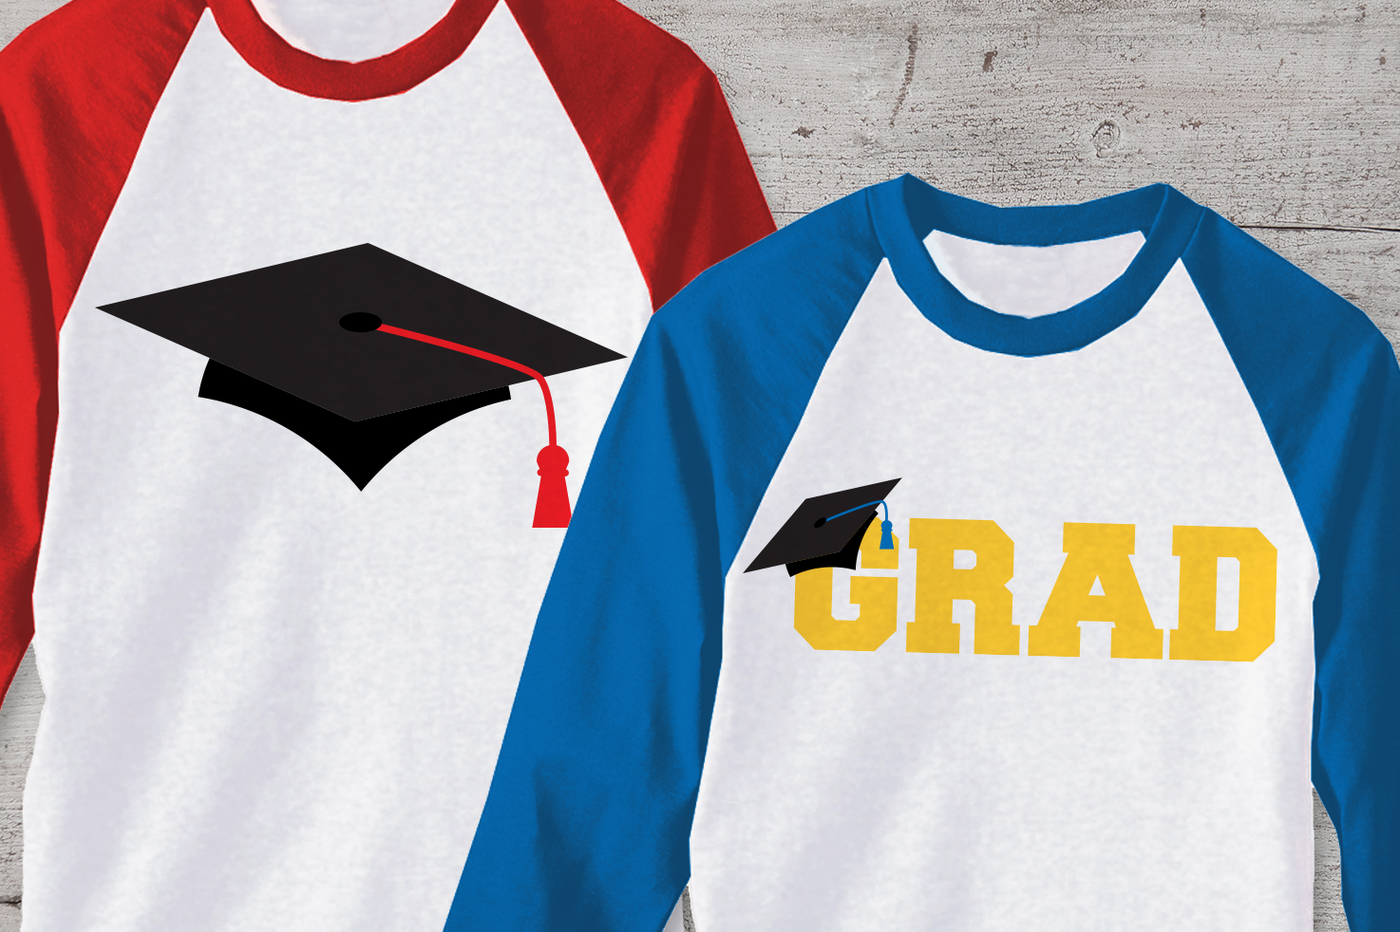 ori 3468331 b78f0ff7406ecb769b70a687fe05f972b39d0284 graduation caps svg png